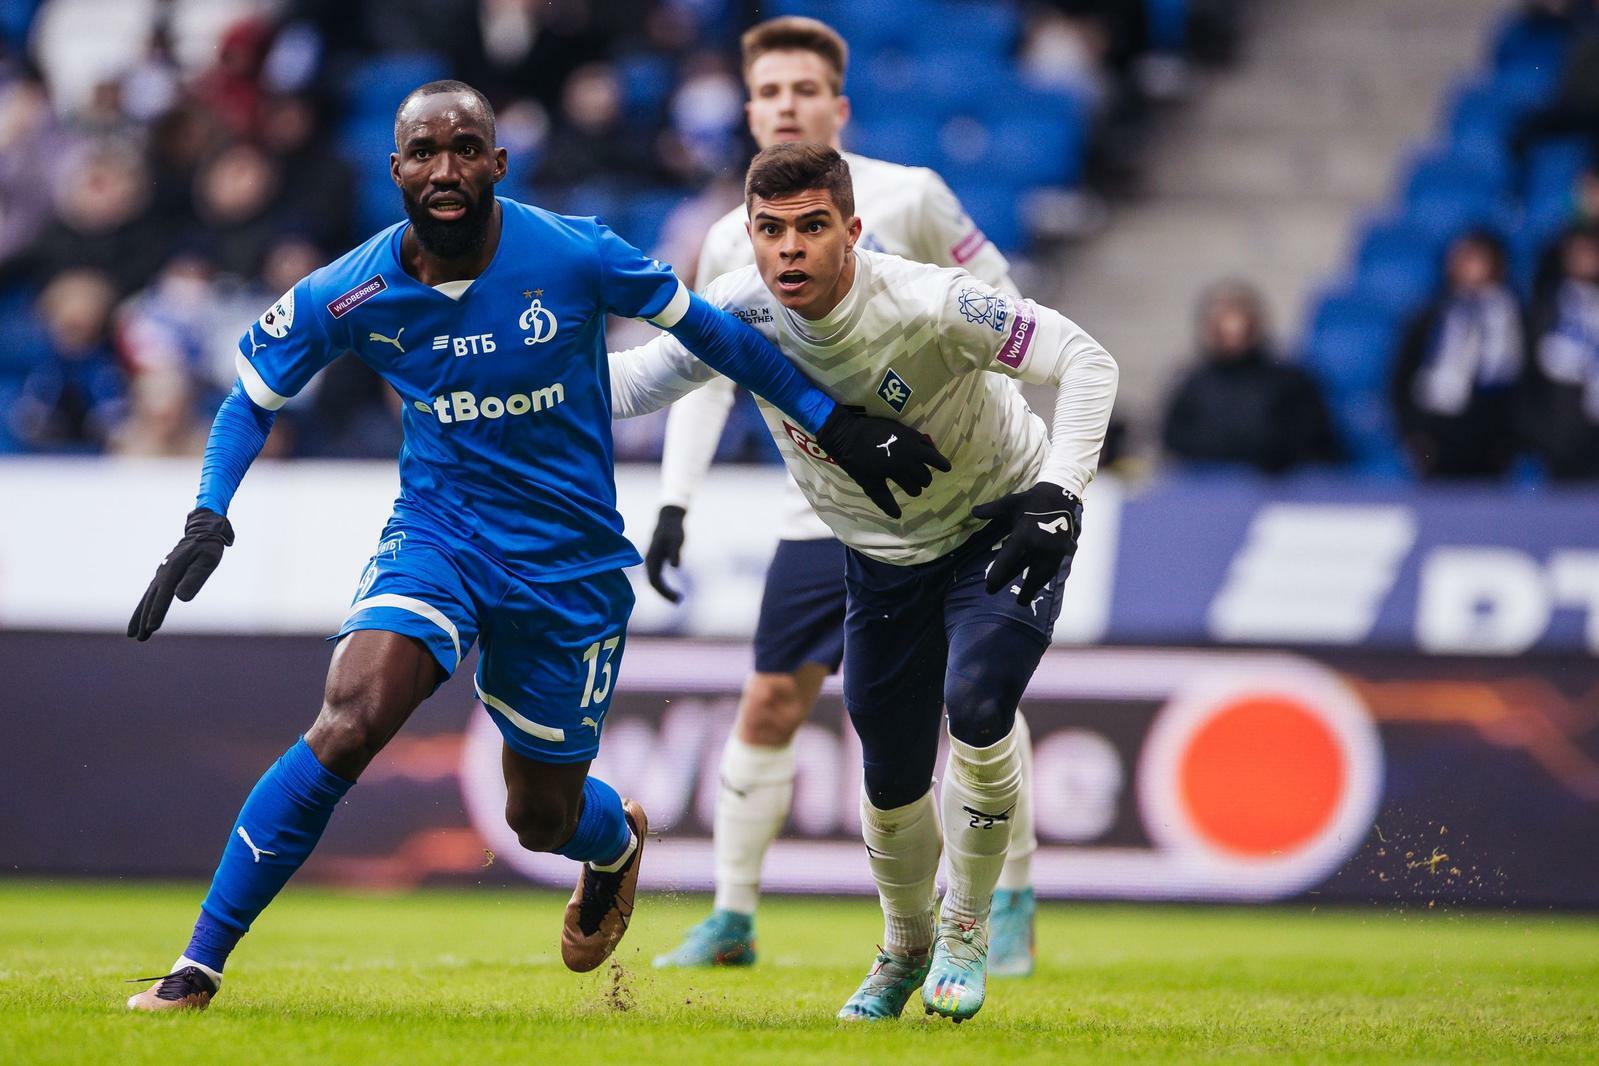 FC Dynamo Moscow News | Match previews against "Krylia Sovetov": where to watch, our news, and everything about the opponent. Official website of Dynamo club.